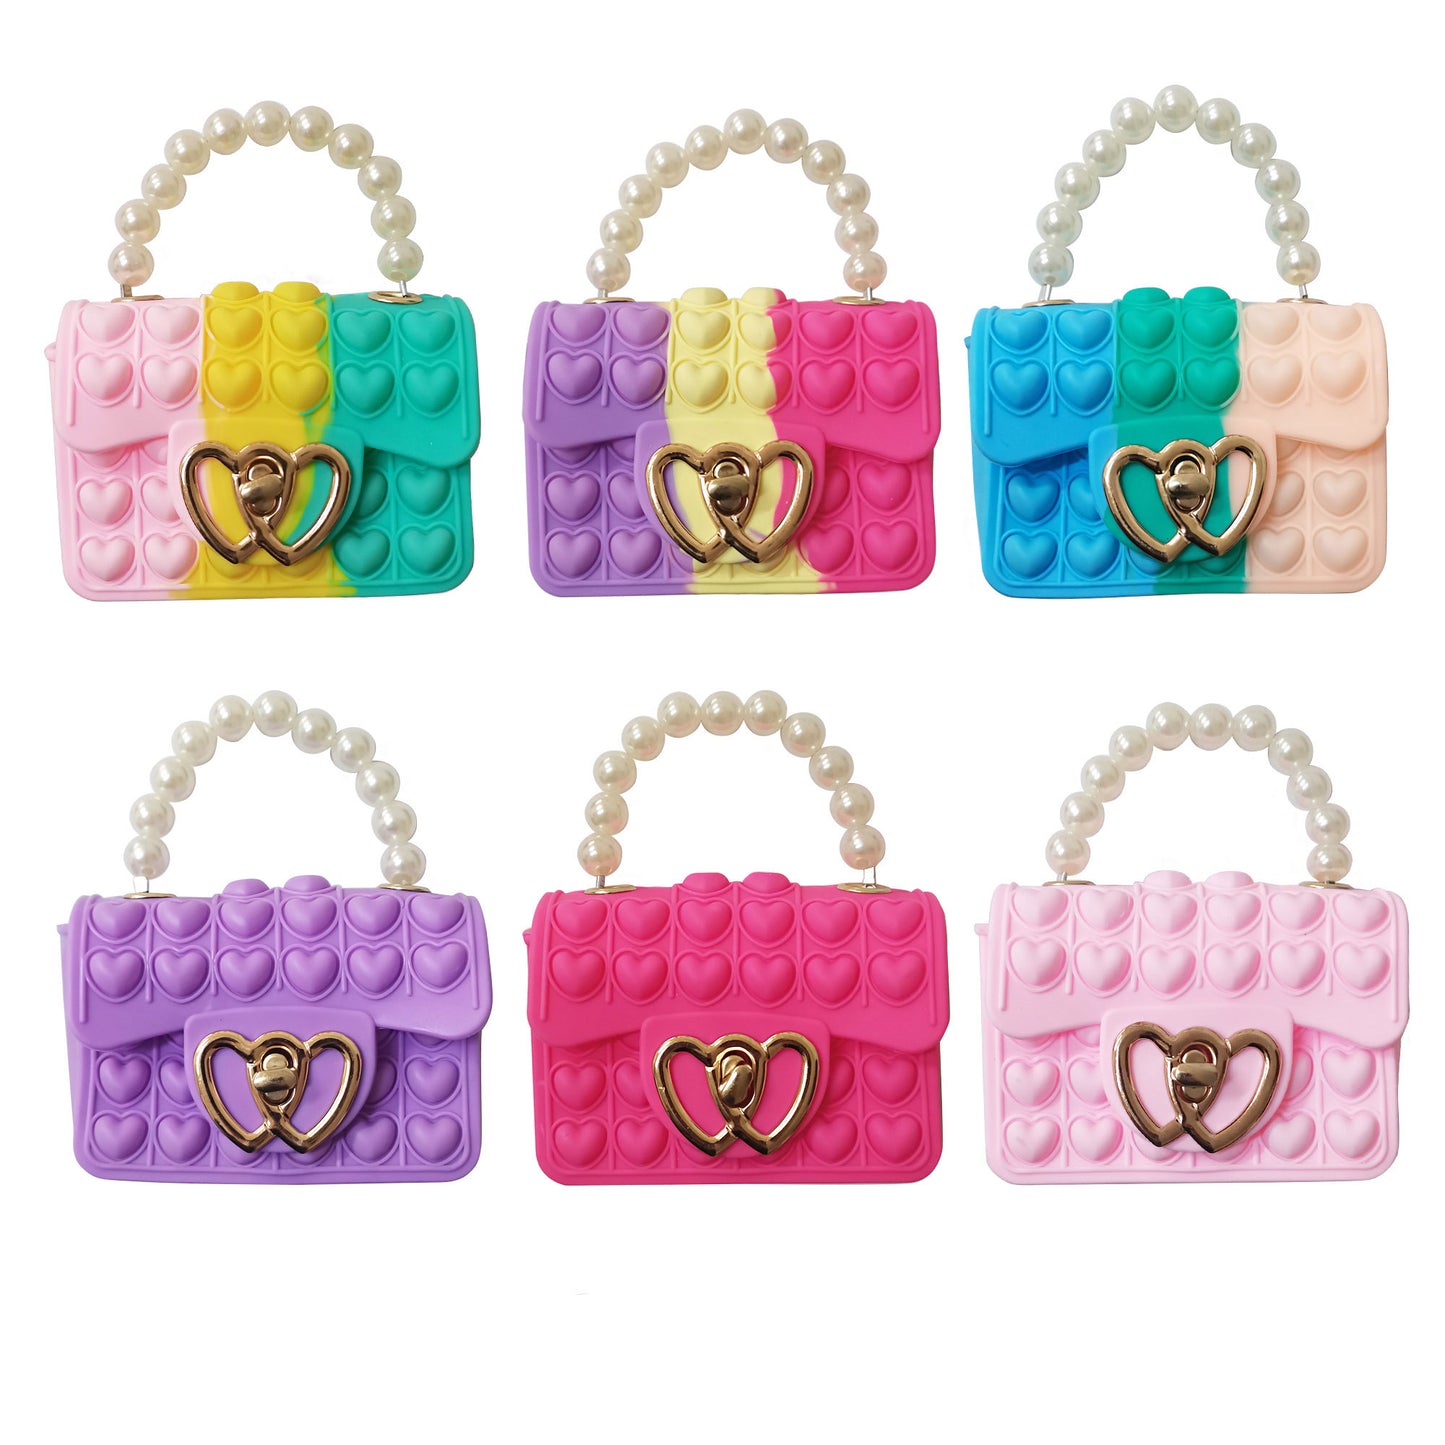 KIDS HEART QUILTED MINI PURSE 3113-56 (12PC)